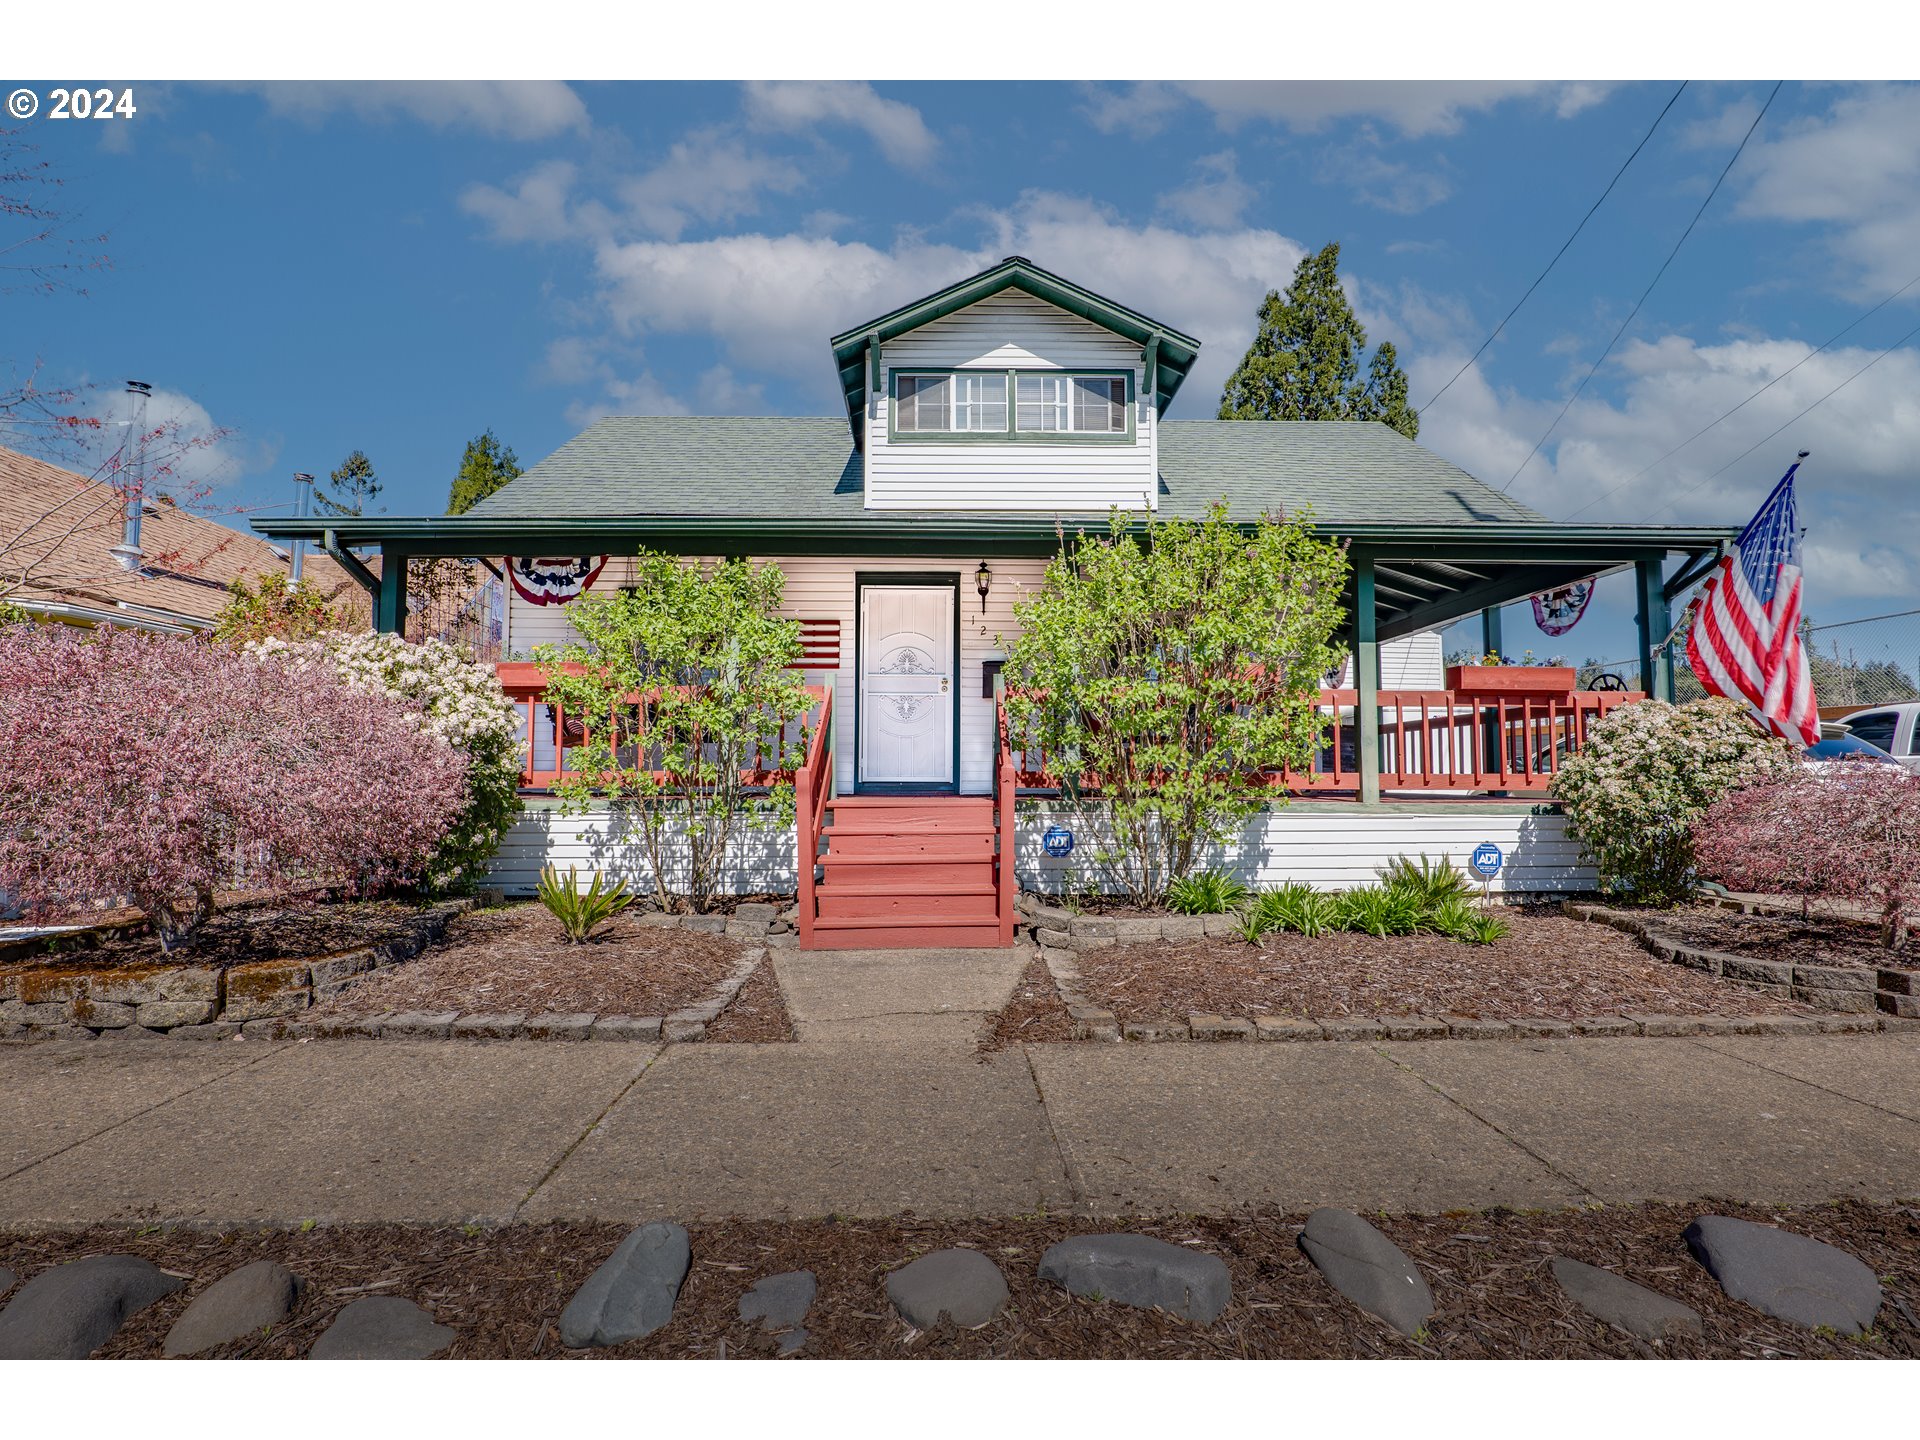 1232 W MAIN ST, Cottage Grove, OR 